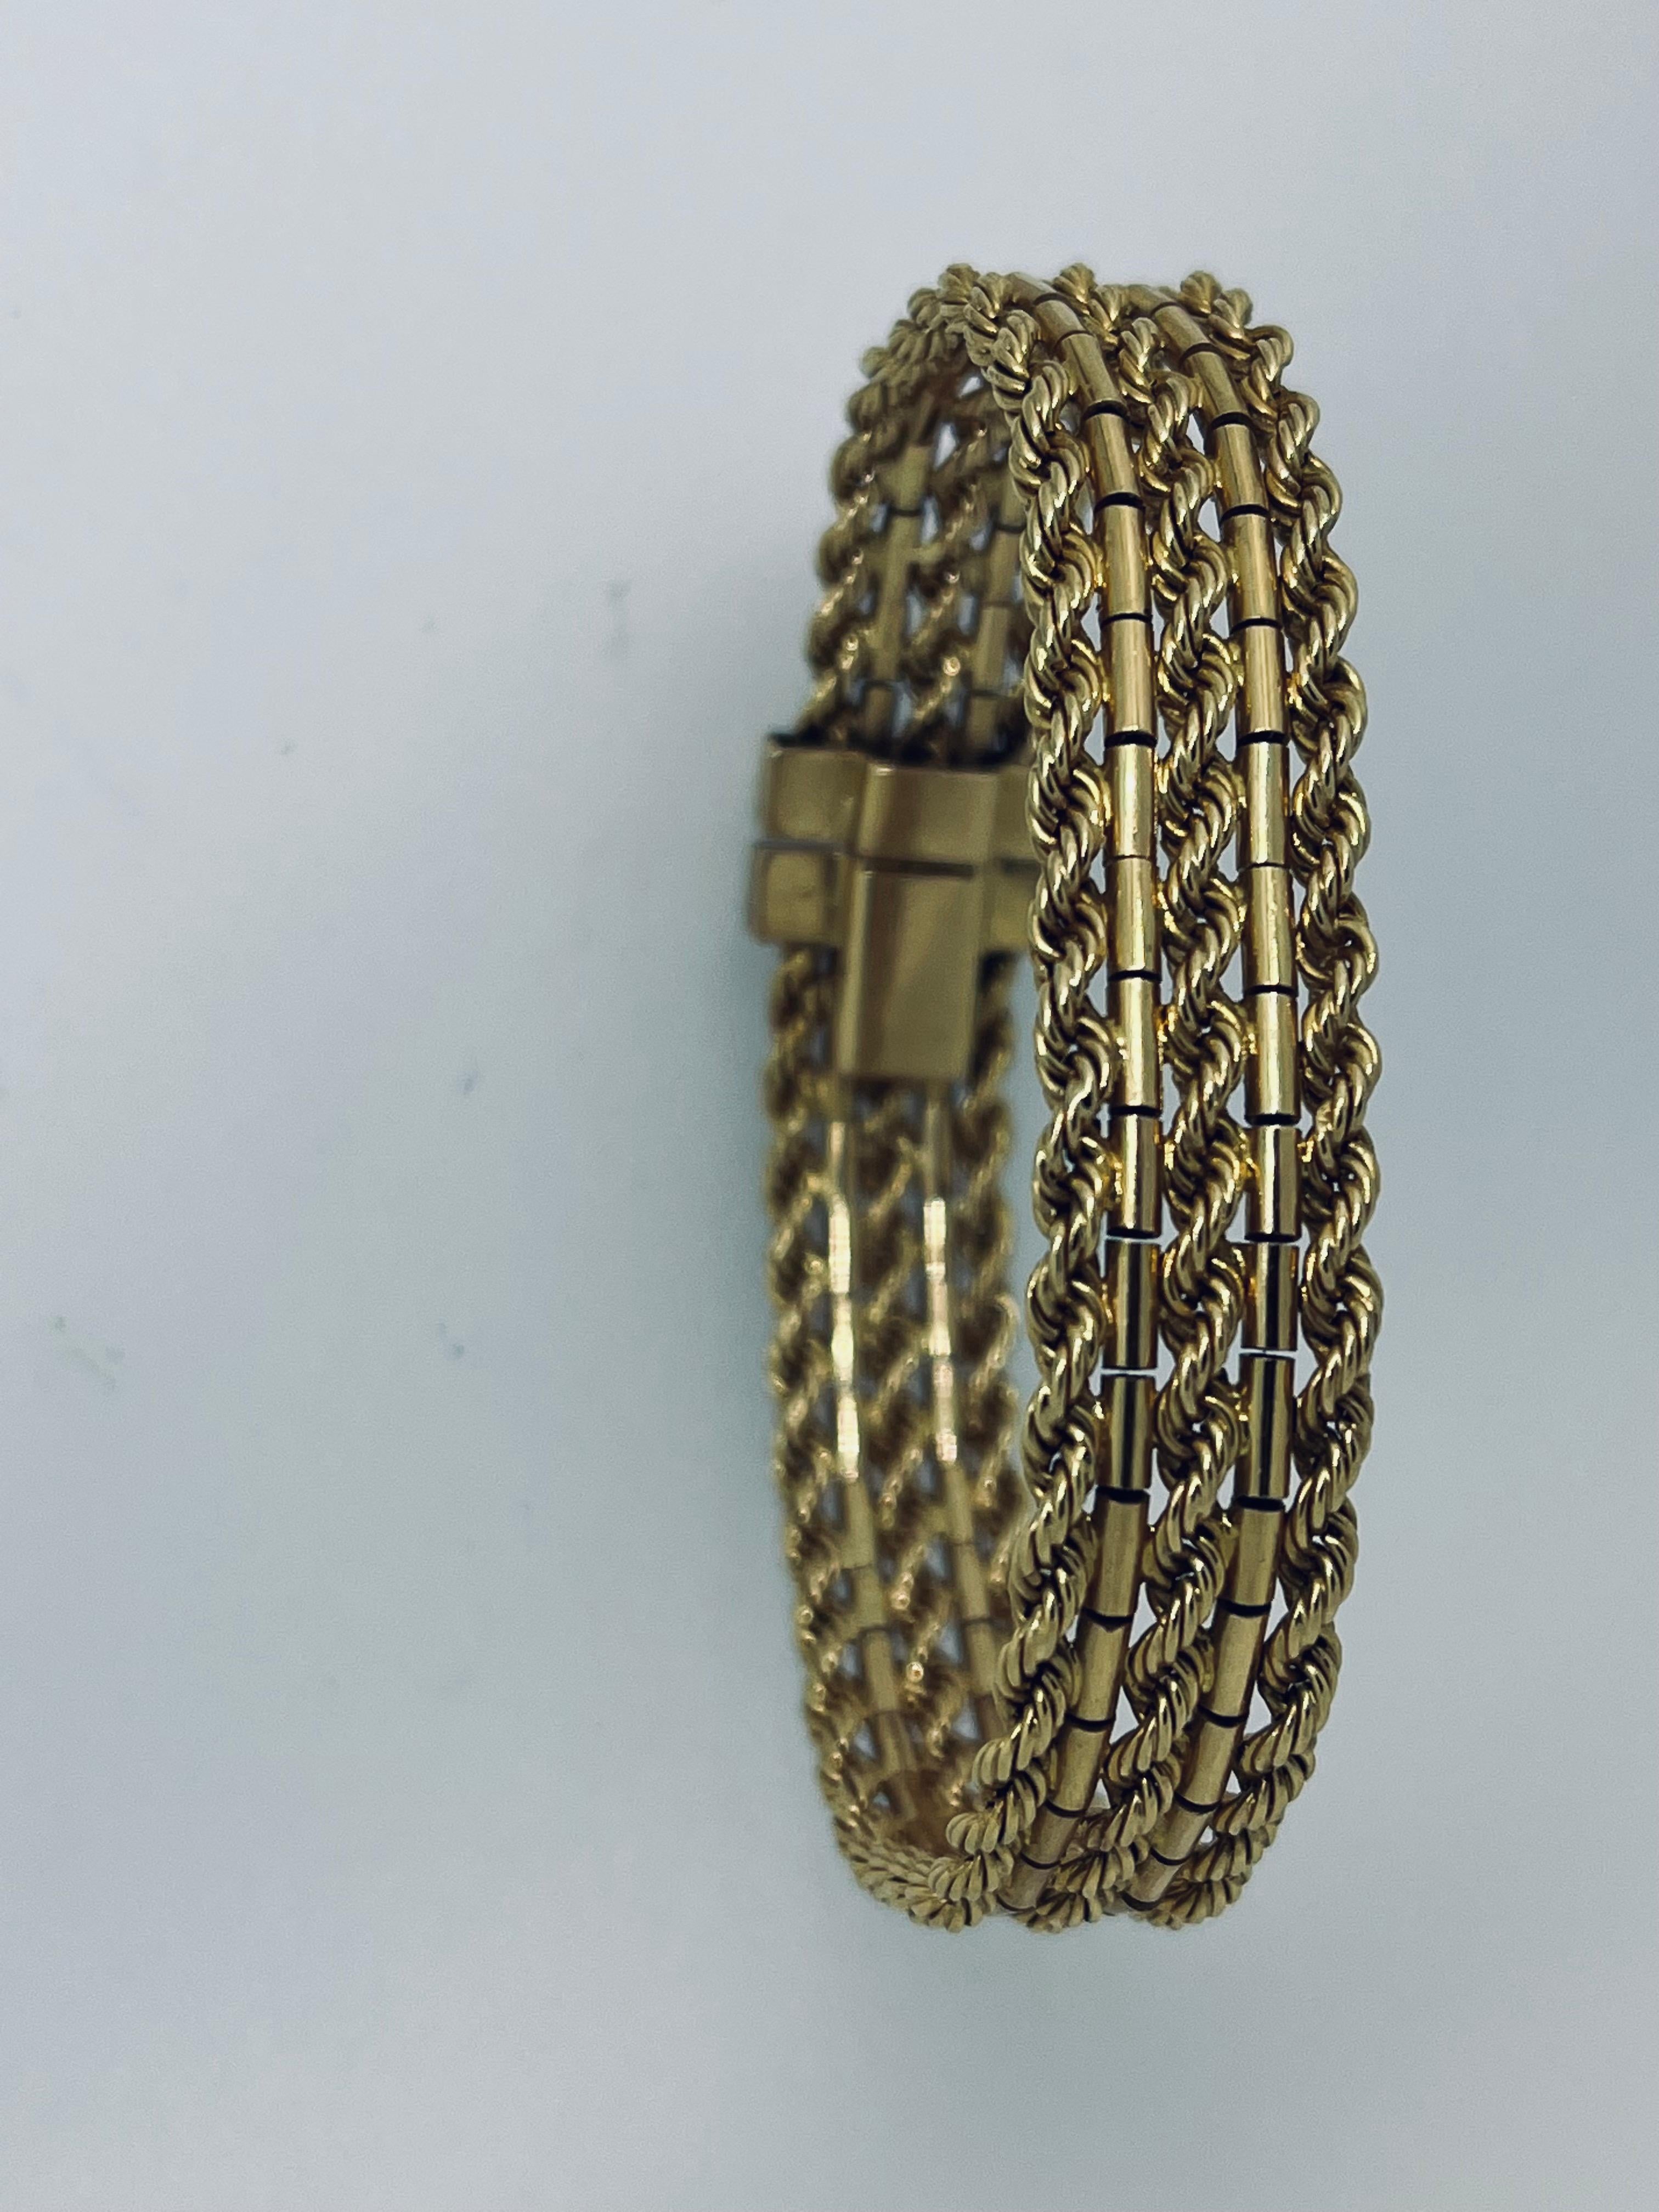 Marked 18ct three row rope gold bracelet, circa 1960s, 30.9 grammes, 17.8cm length, 21mm width. Unbranded, made in Italy. Hallmark: stamp of a head with a helmet representing a hallmark and it was tested with a gun that confirmed 18ct. Price: